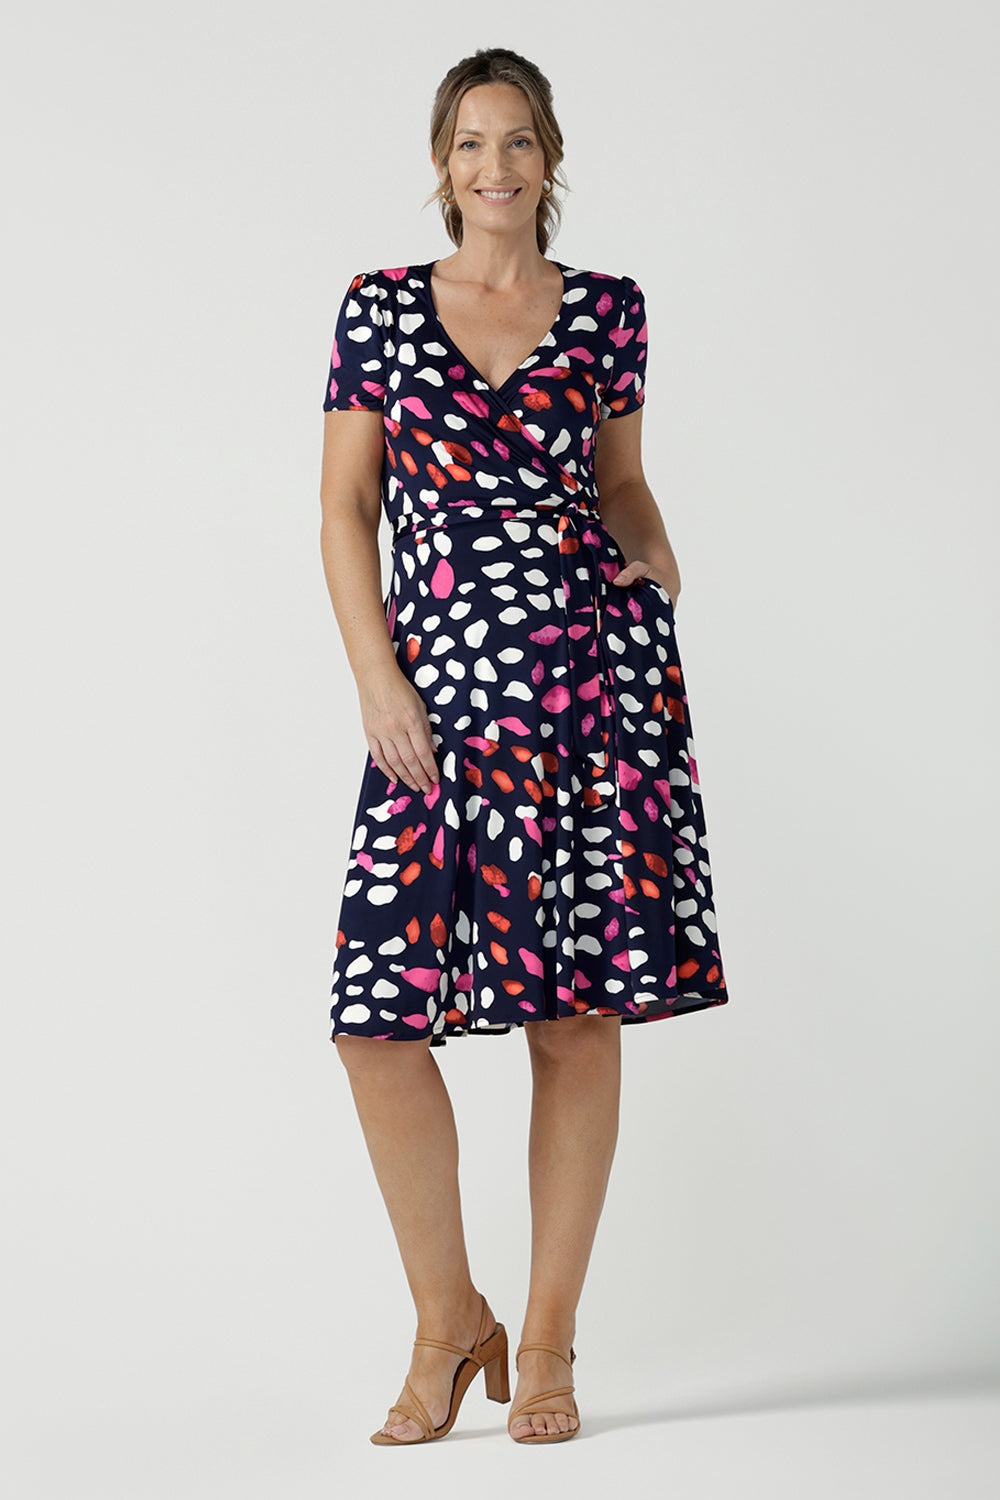 An over 40, size 10 woman wearing a abstract jersey print, knee length wrap dress with short sleeves. A great dress for summer casual wear, or for travel. Shop made in Australia dresses in petite to plus sizes online at Australian fashion brand, Leina & Fleur.